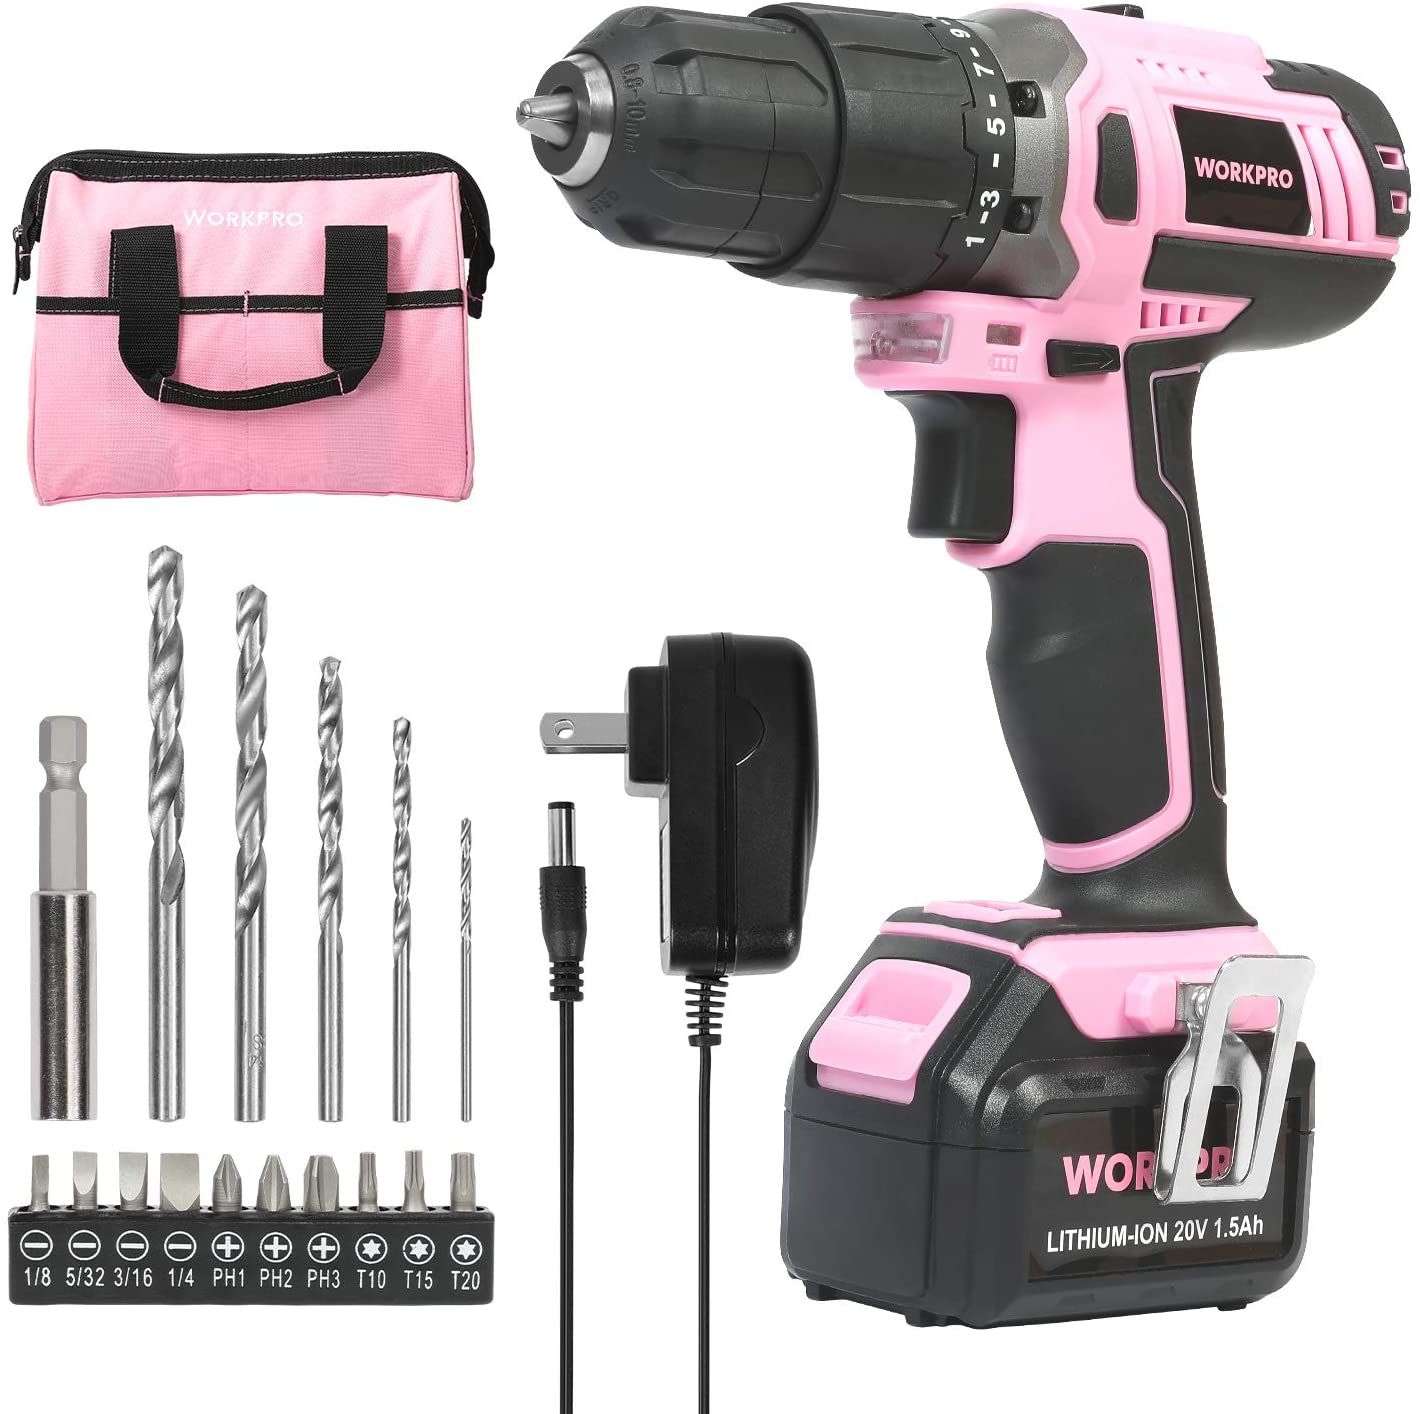 10 Best Lightweight Cordless Drills 2022 - Reviews & Buying Guide